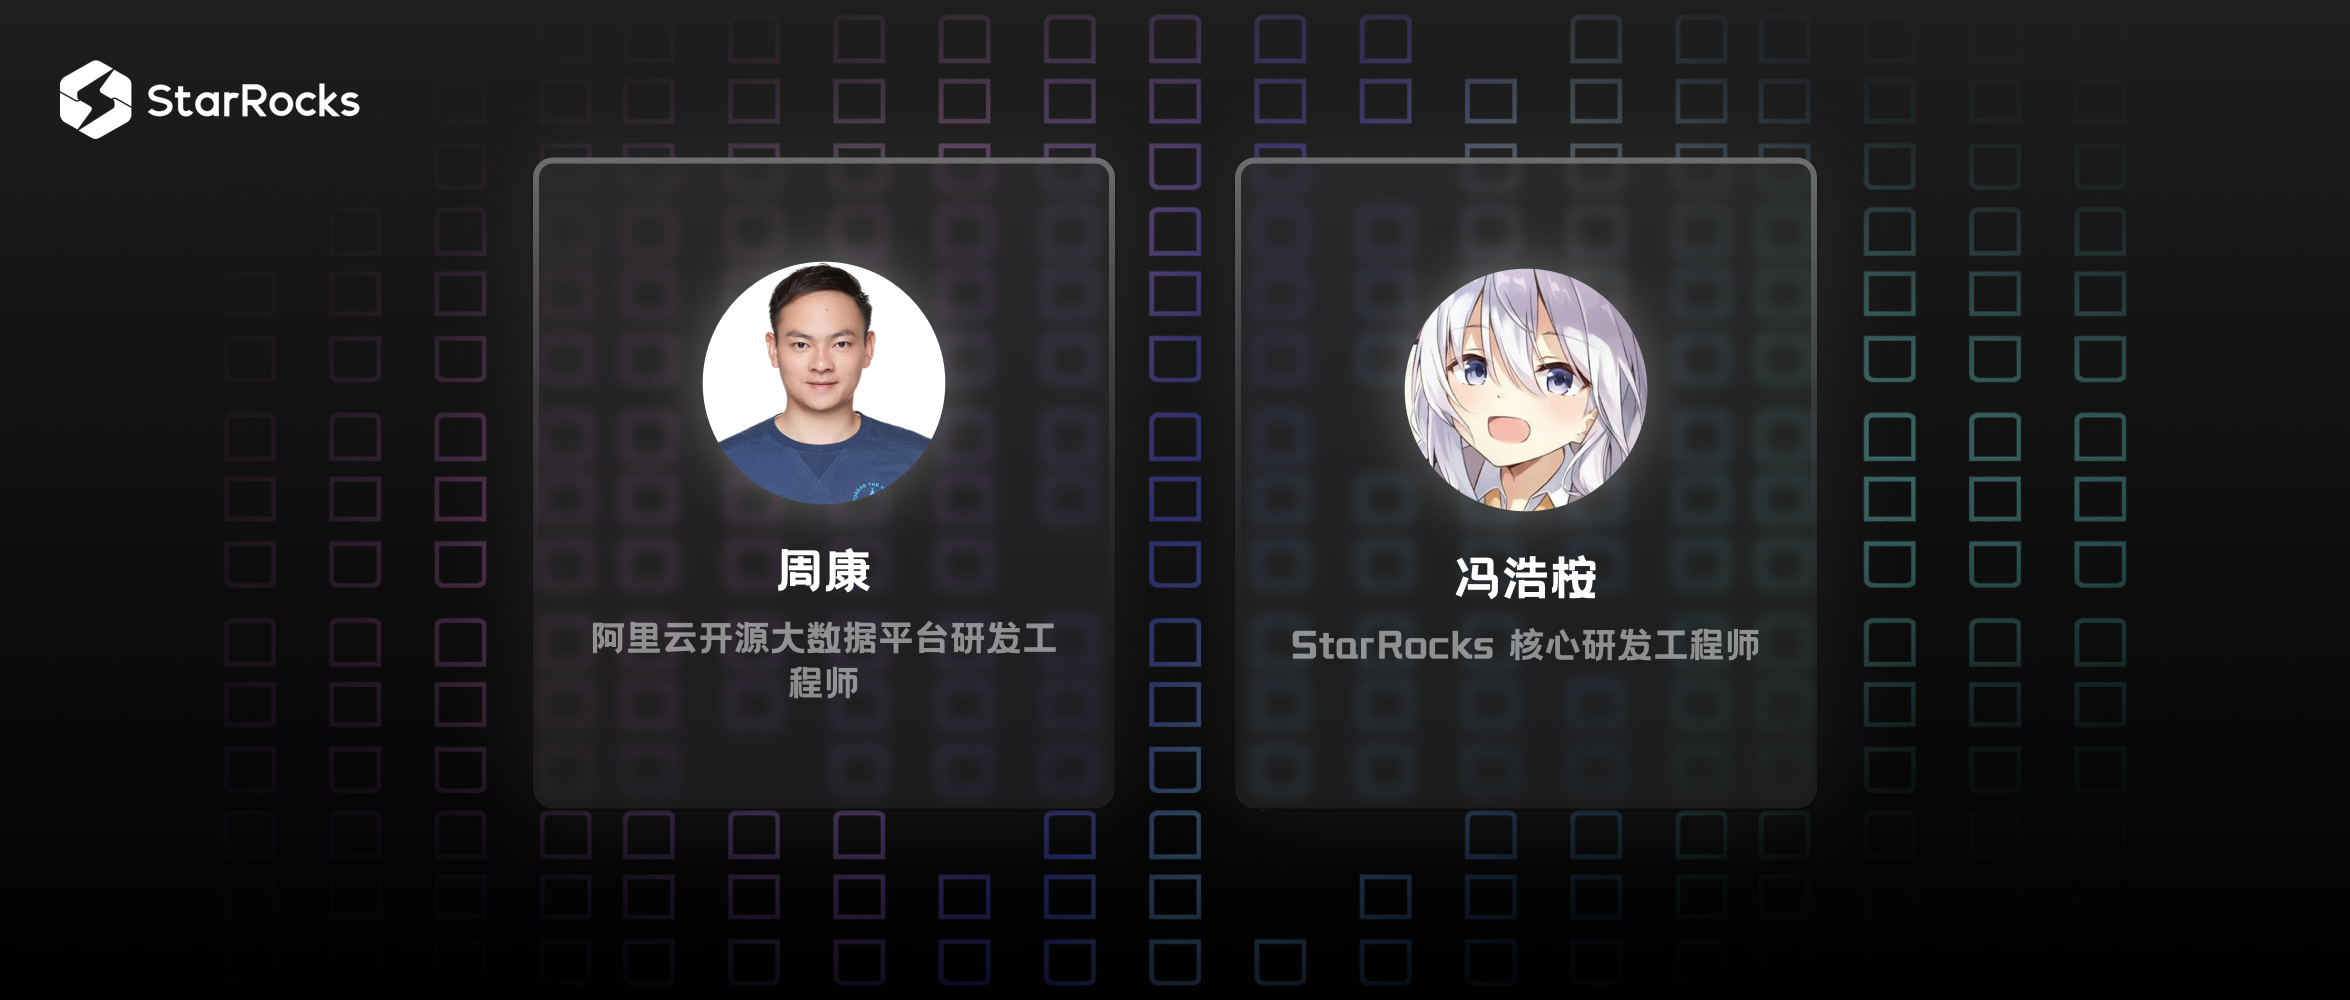 We are learning by contributing！访 StarRocks Committer 周康、冯浩桉